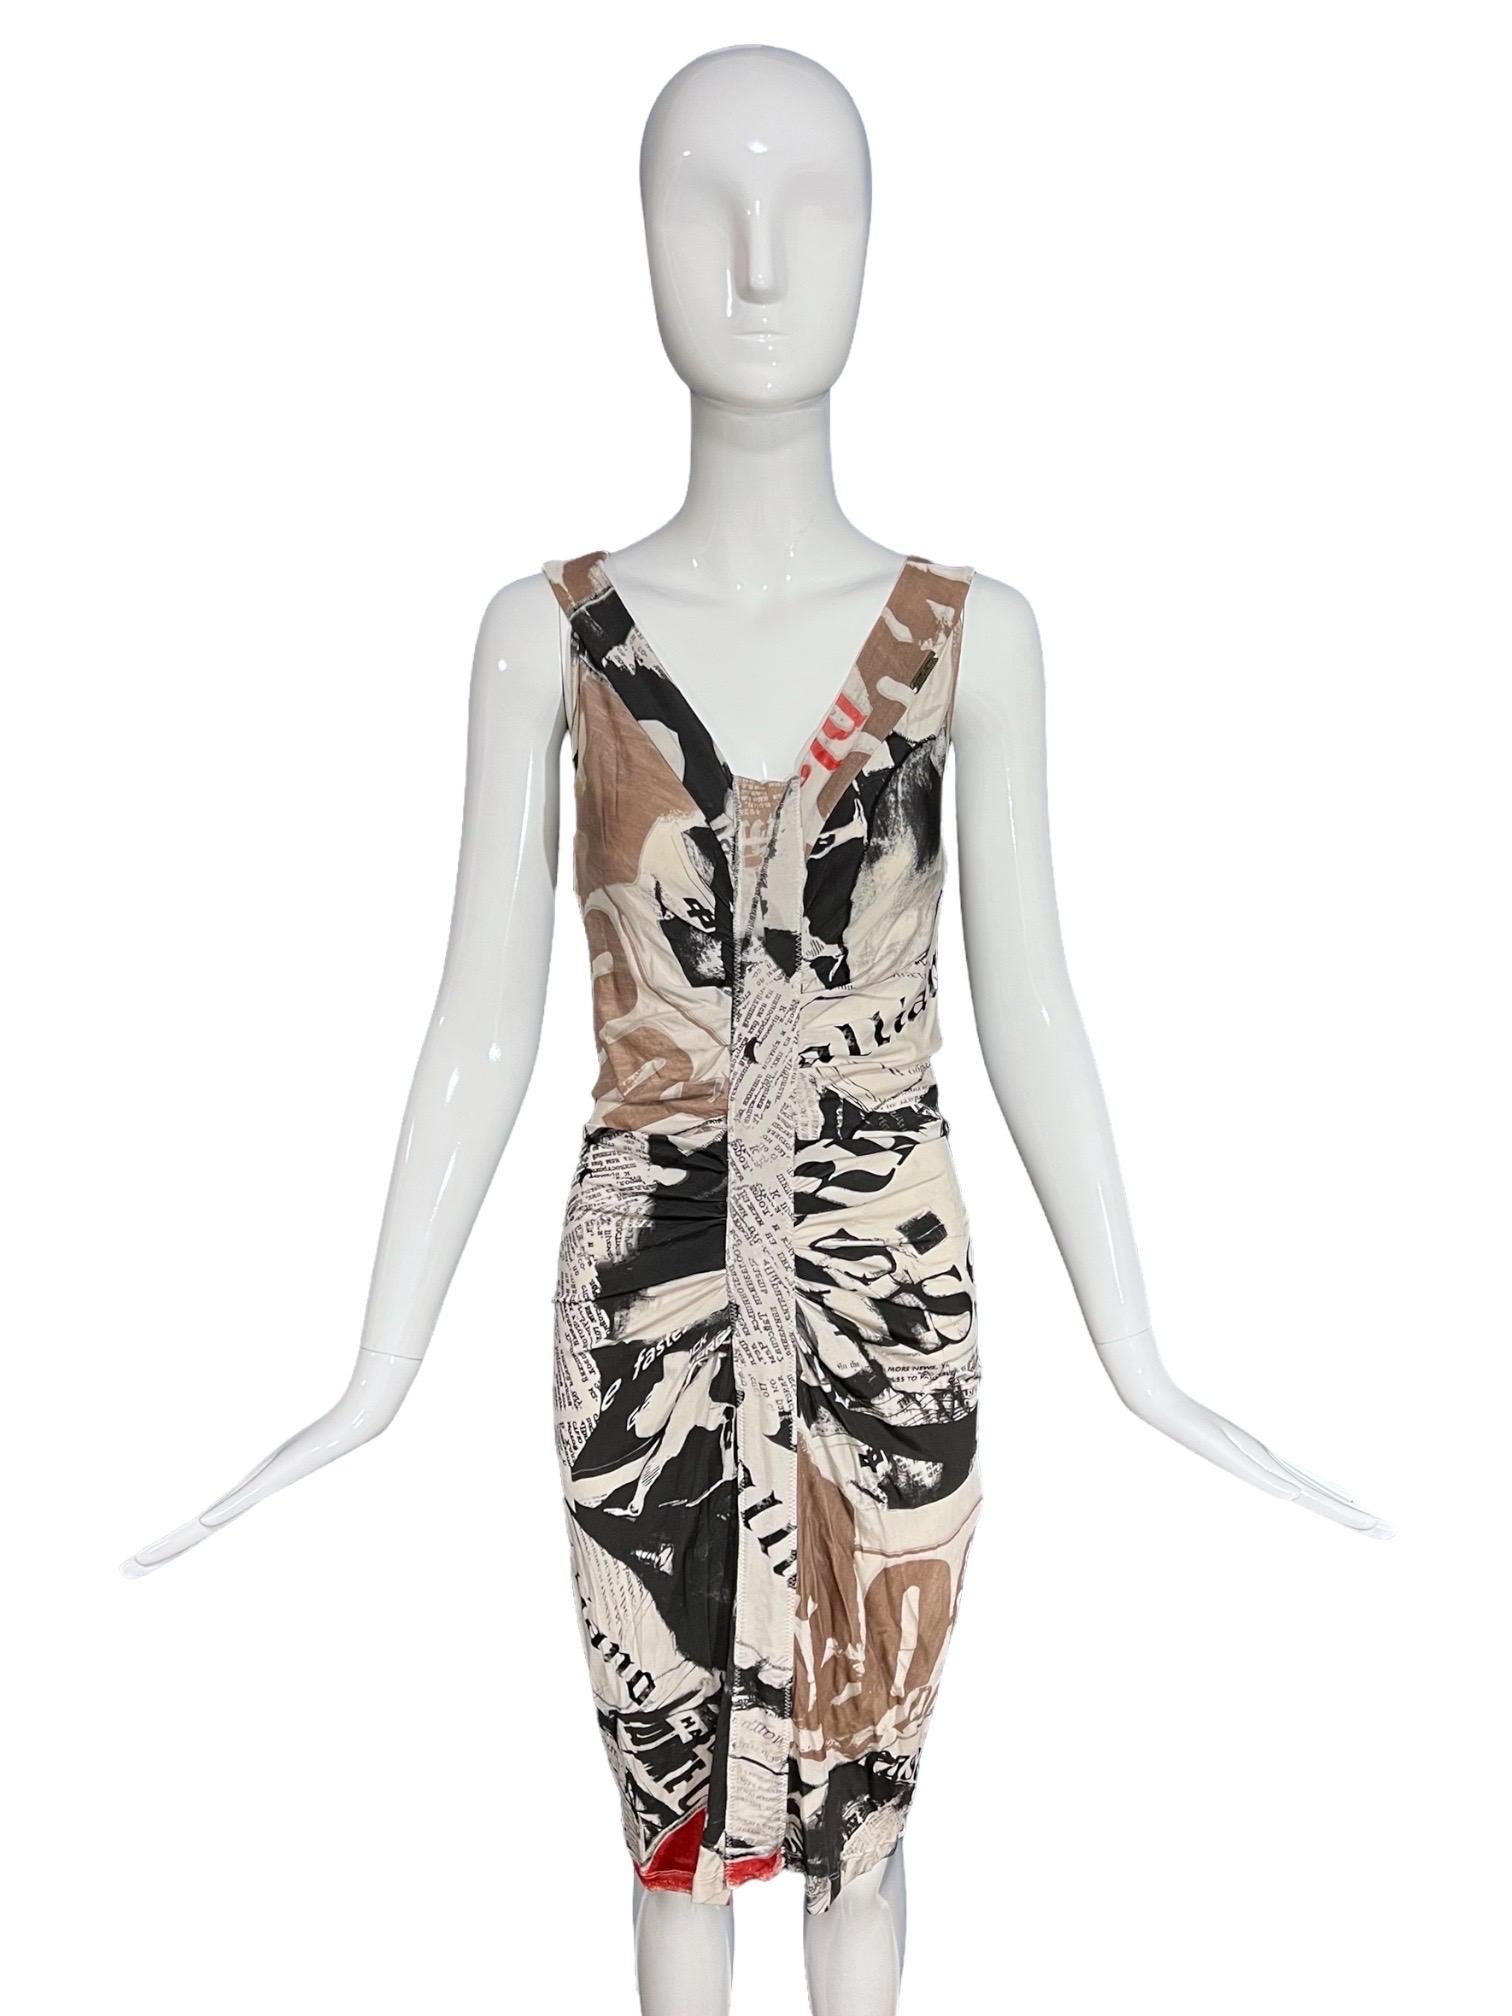 Galliano vintage gazette shirred dress in the epic newspaper print with colorful overlays of beige and red abstract motifs. Features a deep v-neck, shirred down the center of the front and back, and made of a stretchy knit fabric. 

Size: